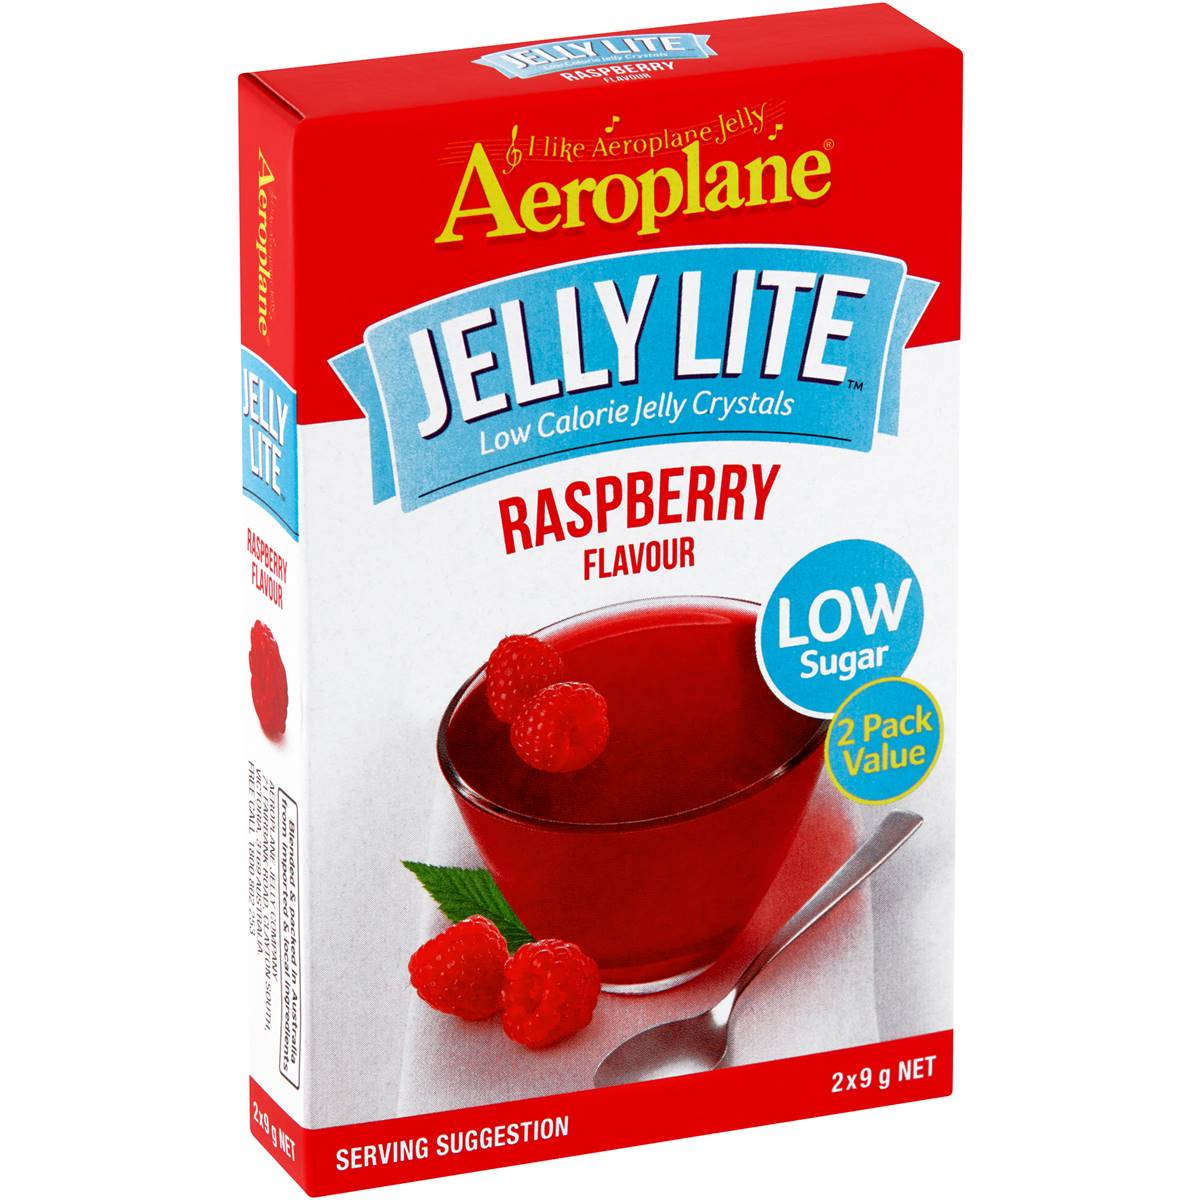 Calories in Aeroplane Jelly Lite Raspberry Flavour Low Calorie Jelly Crystals